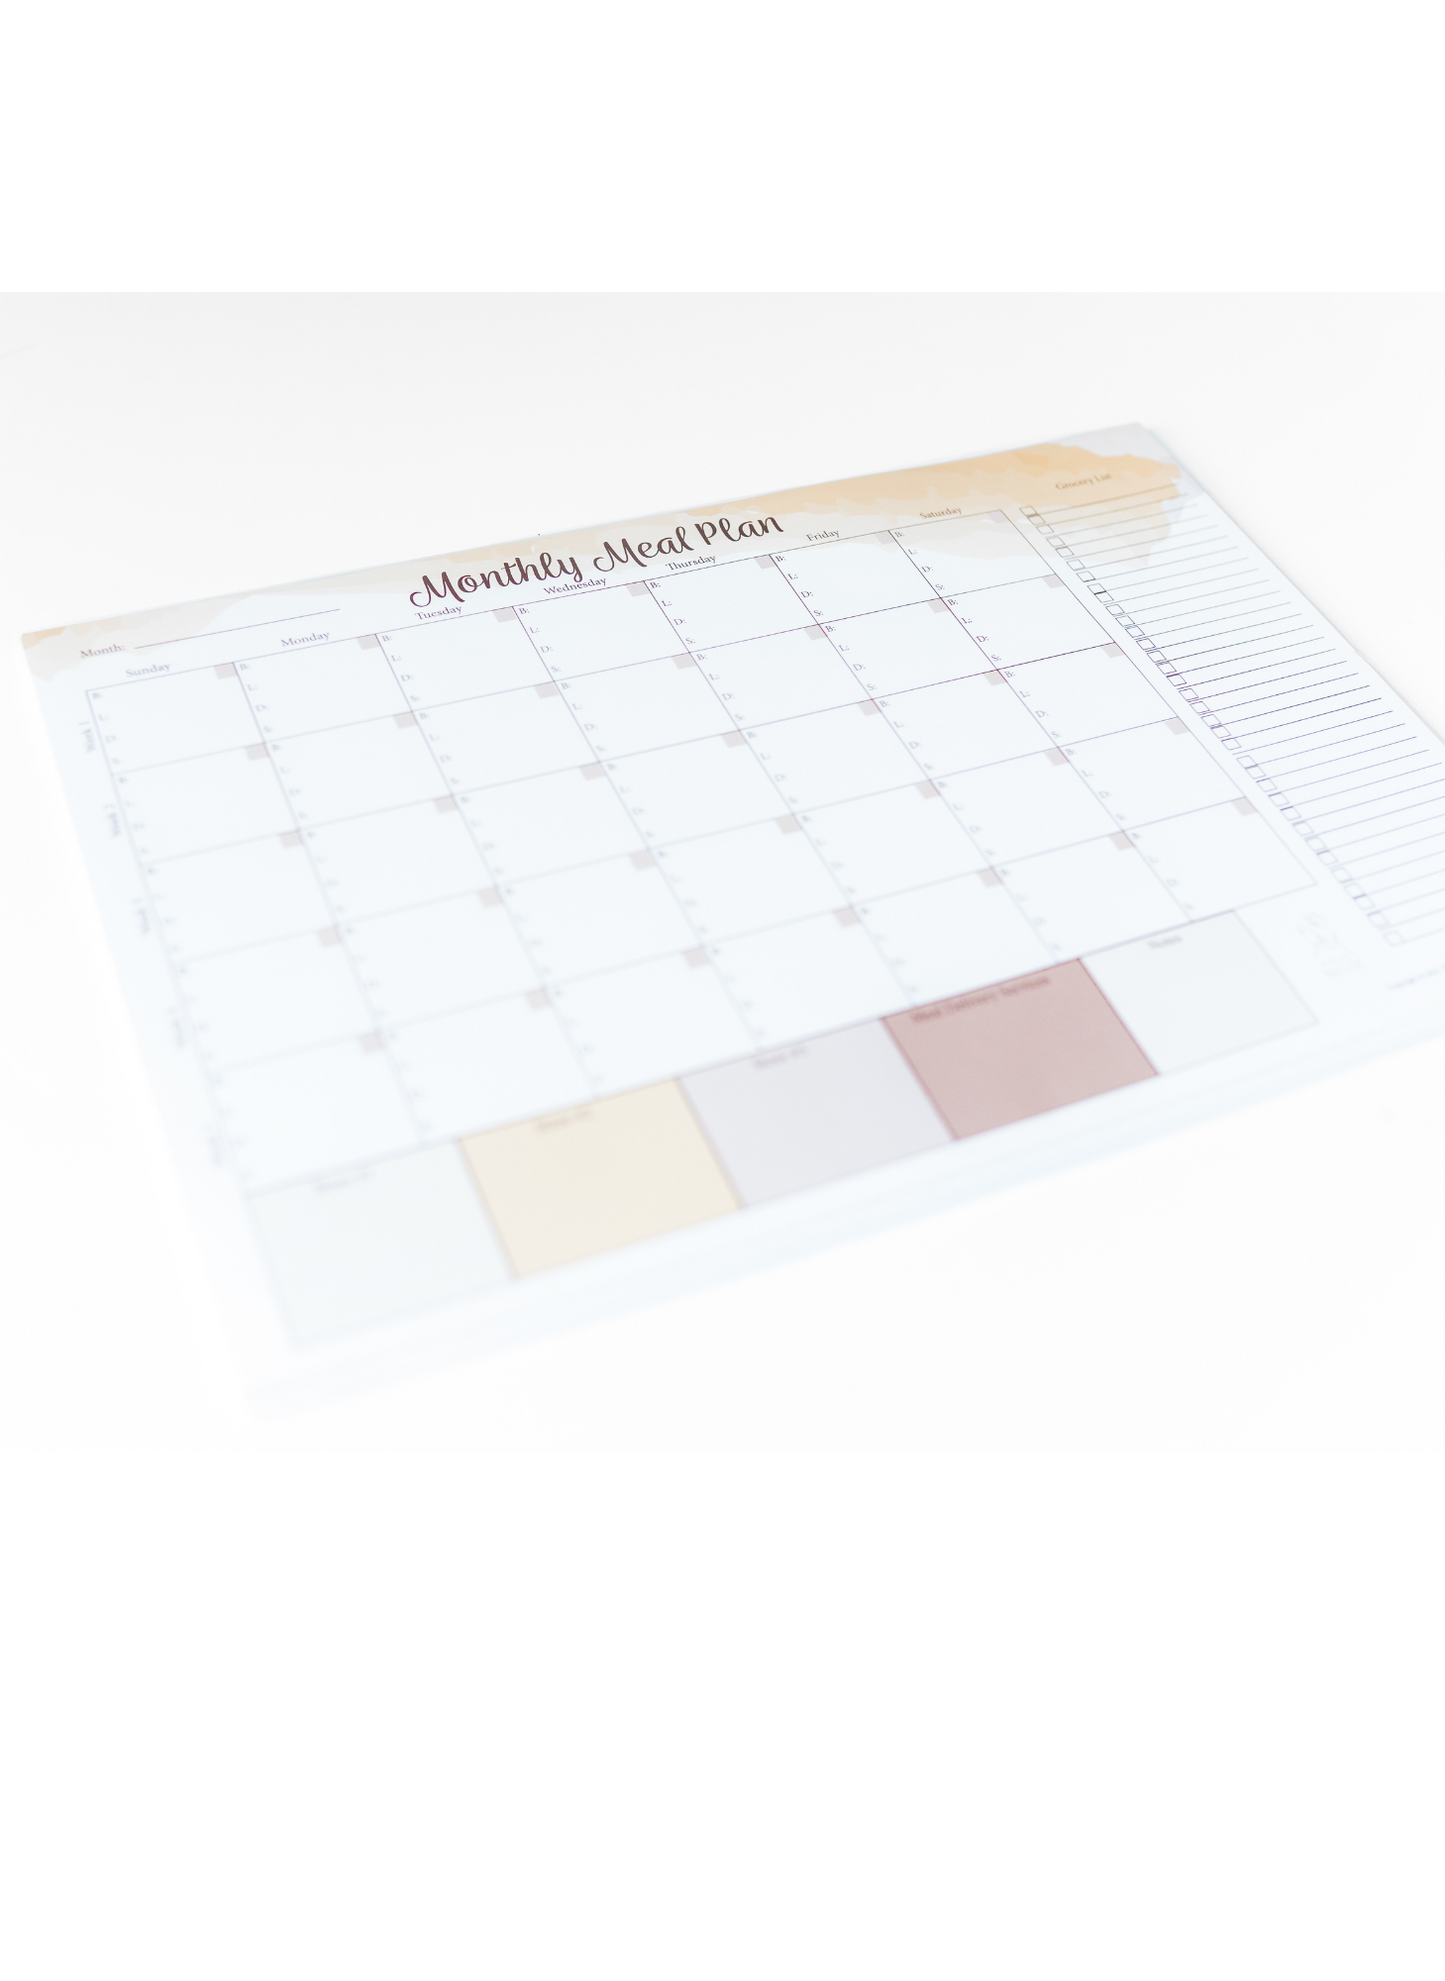 Monthly Meal Plan Notepad